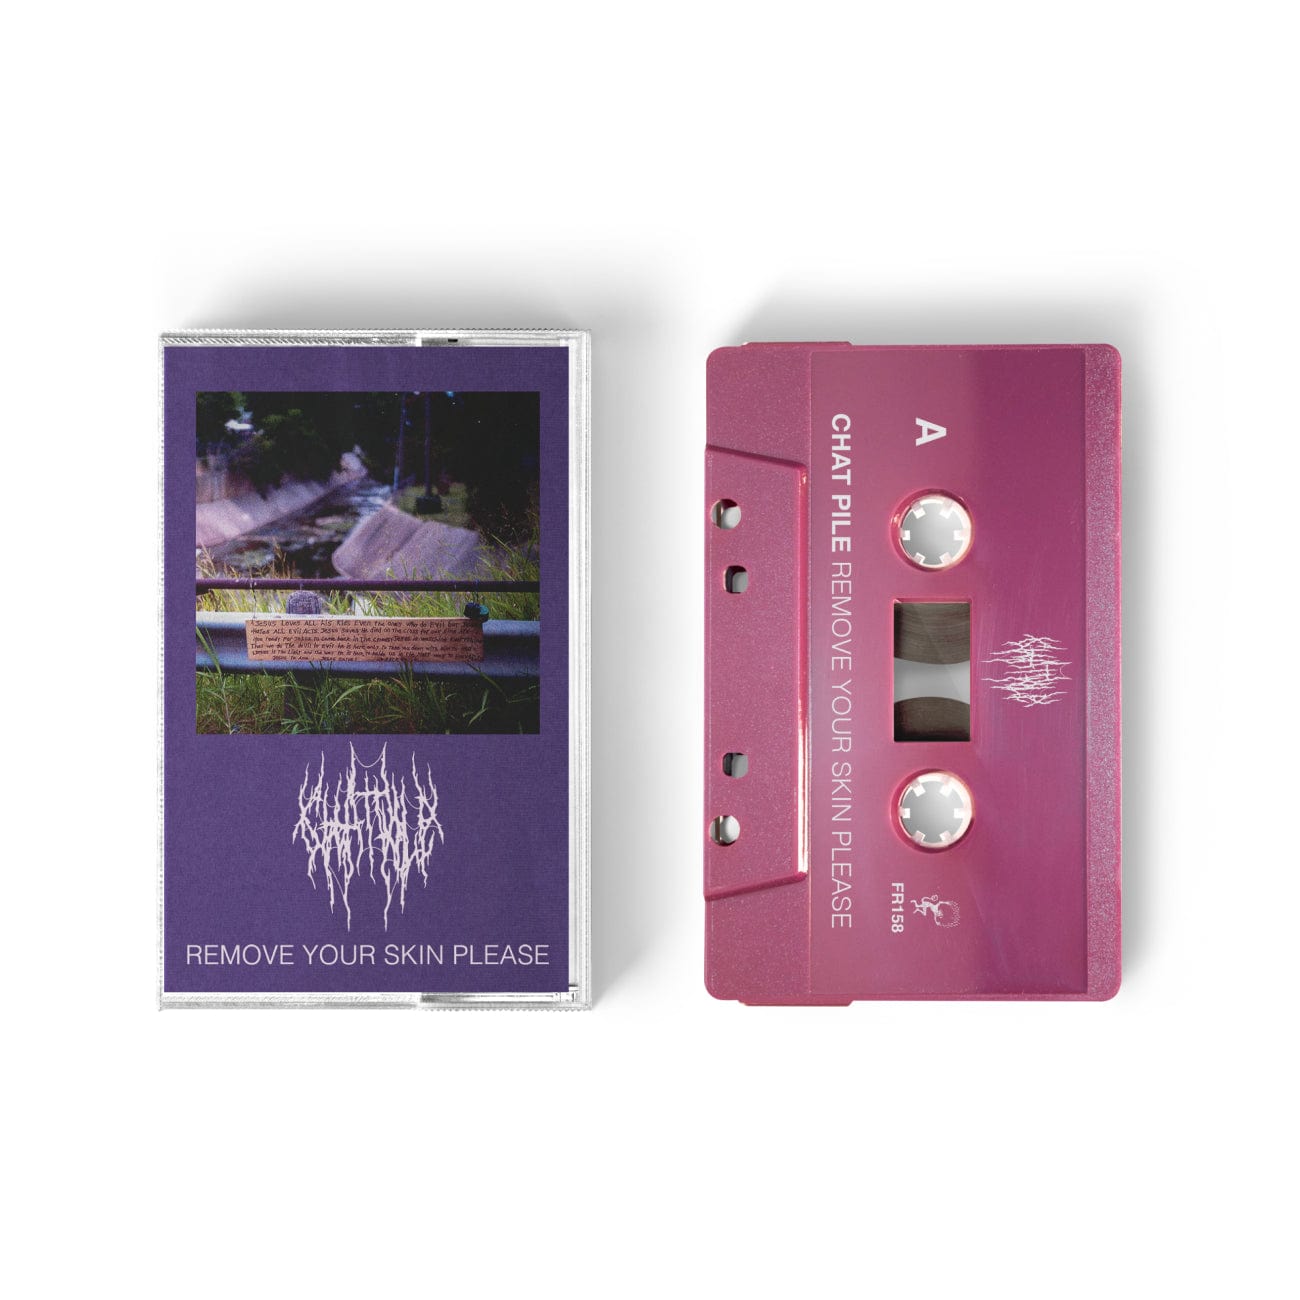 Chat Pile "Remove Your Skin Please" Tape